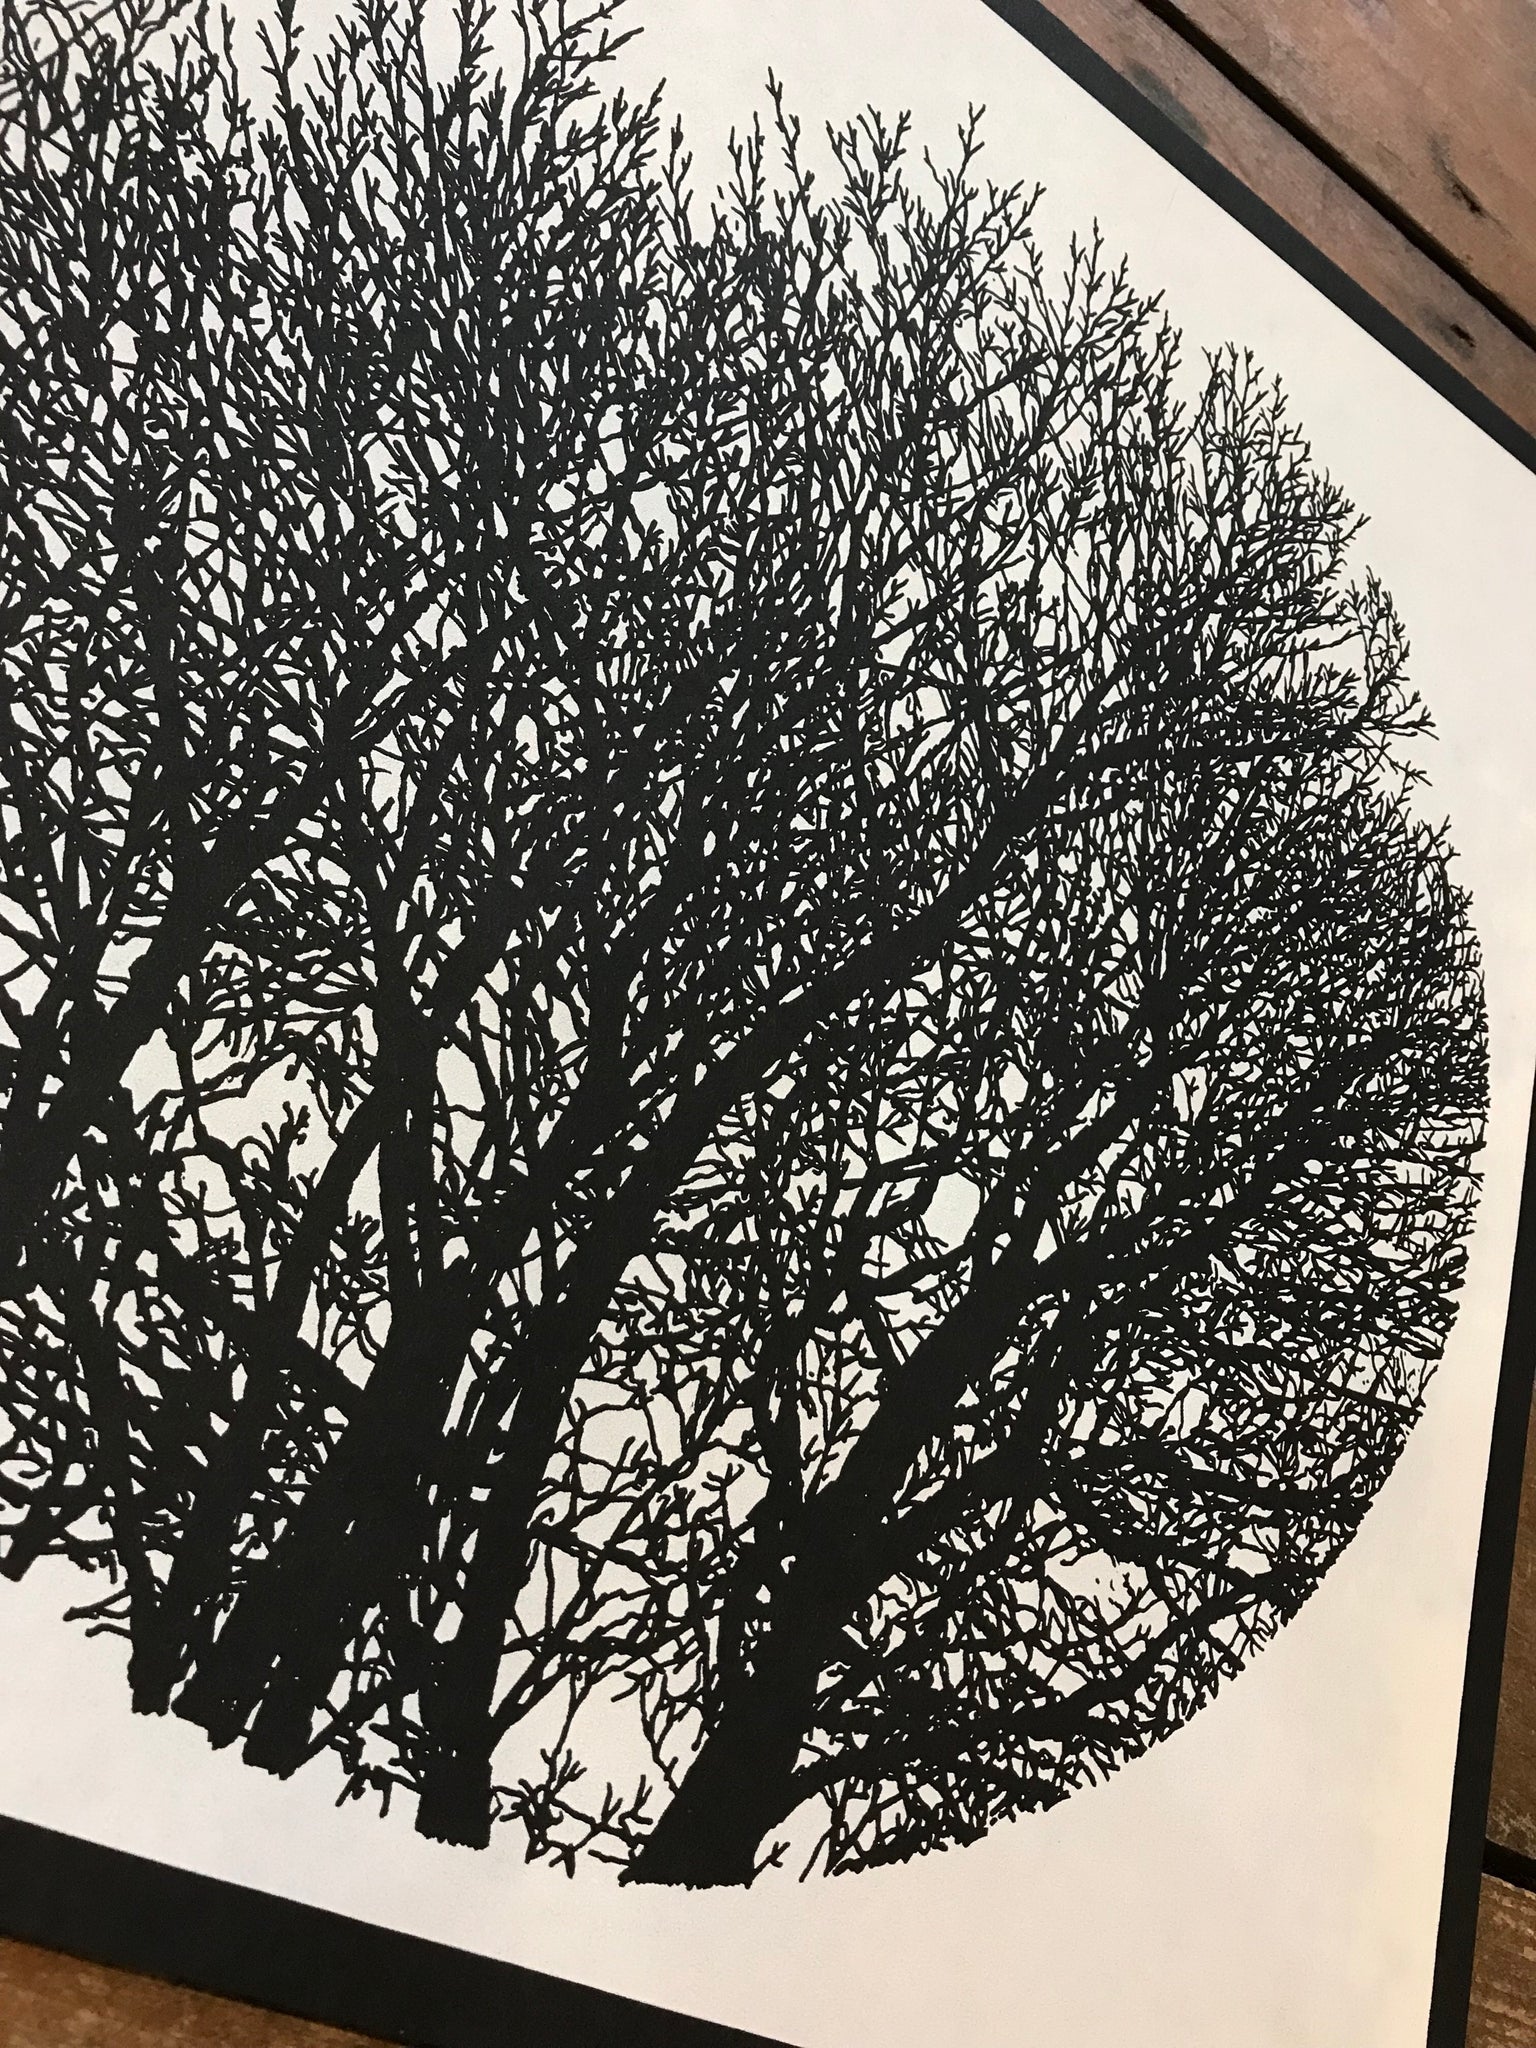 No Visitors - Tree Silhouette 12.5x12.5in Screen Printed Art by Kris Johnsen